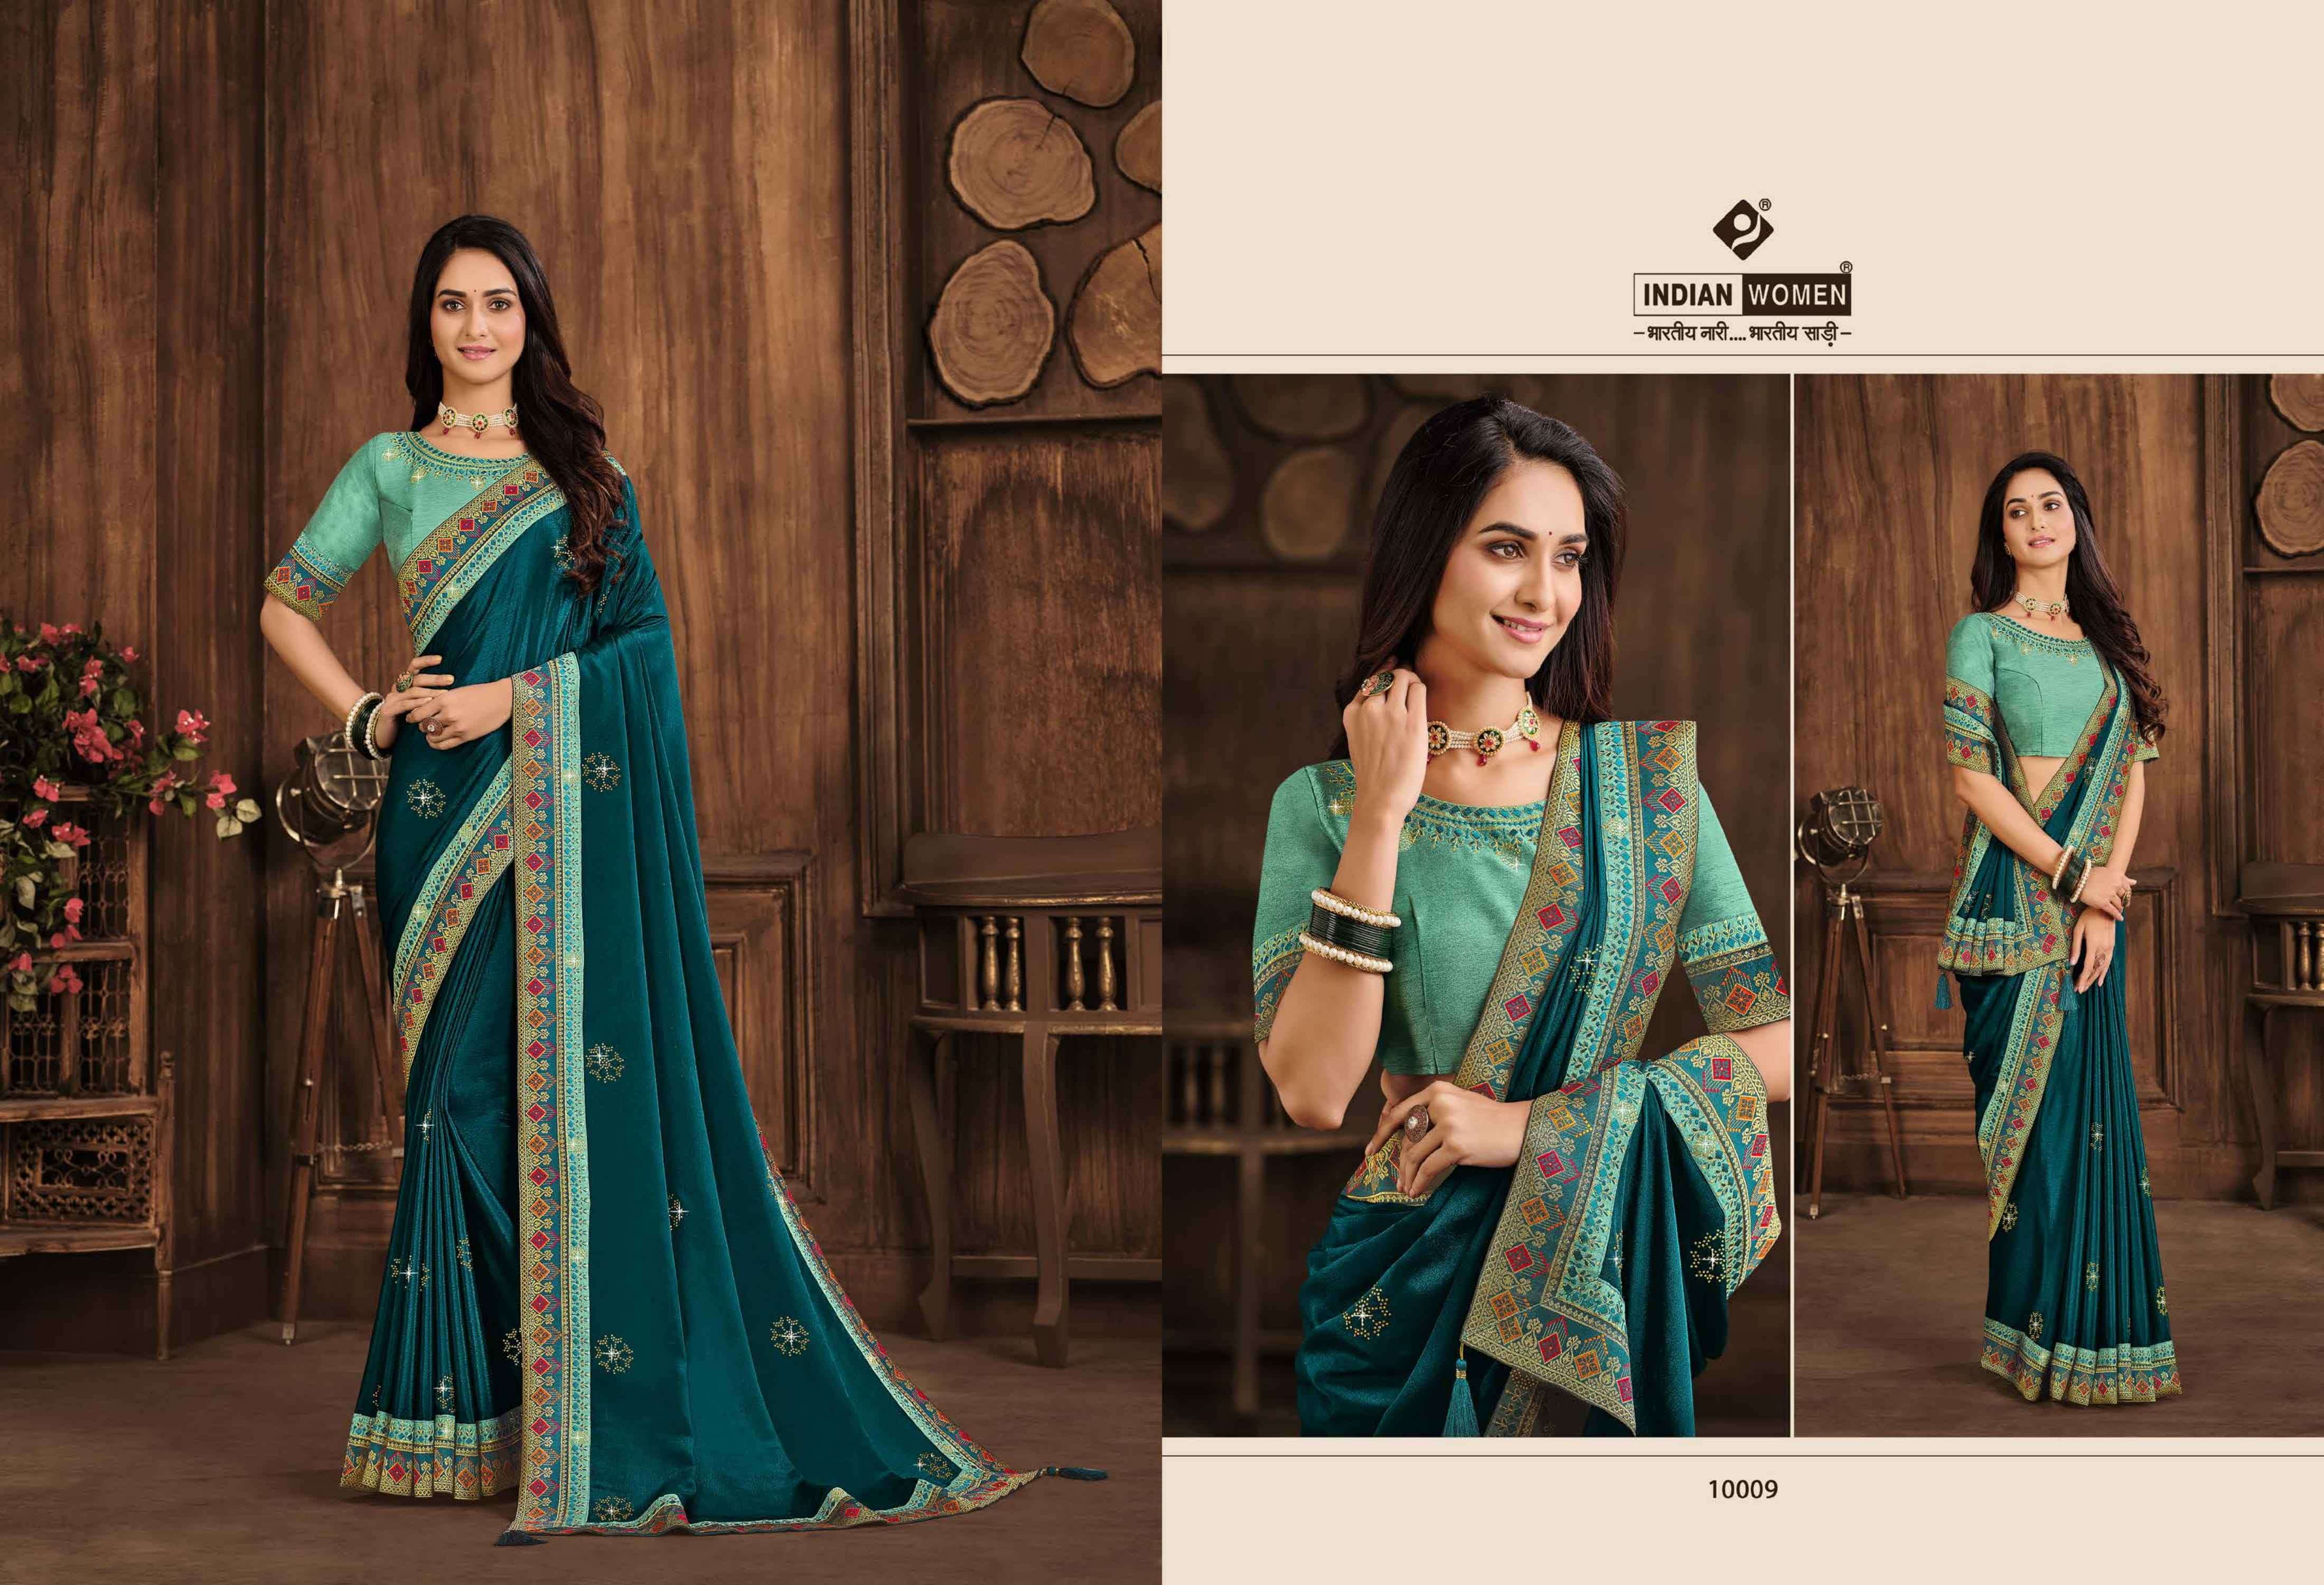 NEW PLATINUM BY INDIAN WOMEN 10008 TO 10013 SERIES INDIAN TRADITIONAL WEAR COLLECTION BEAUTIFUL STYLISH FANCY COLORFUL PARTY WEAR & OCCASIONAL WEAR FANCY SAREES AT WHOLESALE PRICE